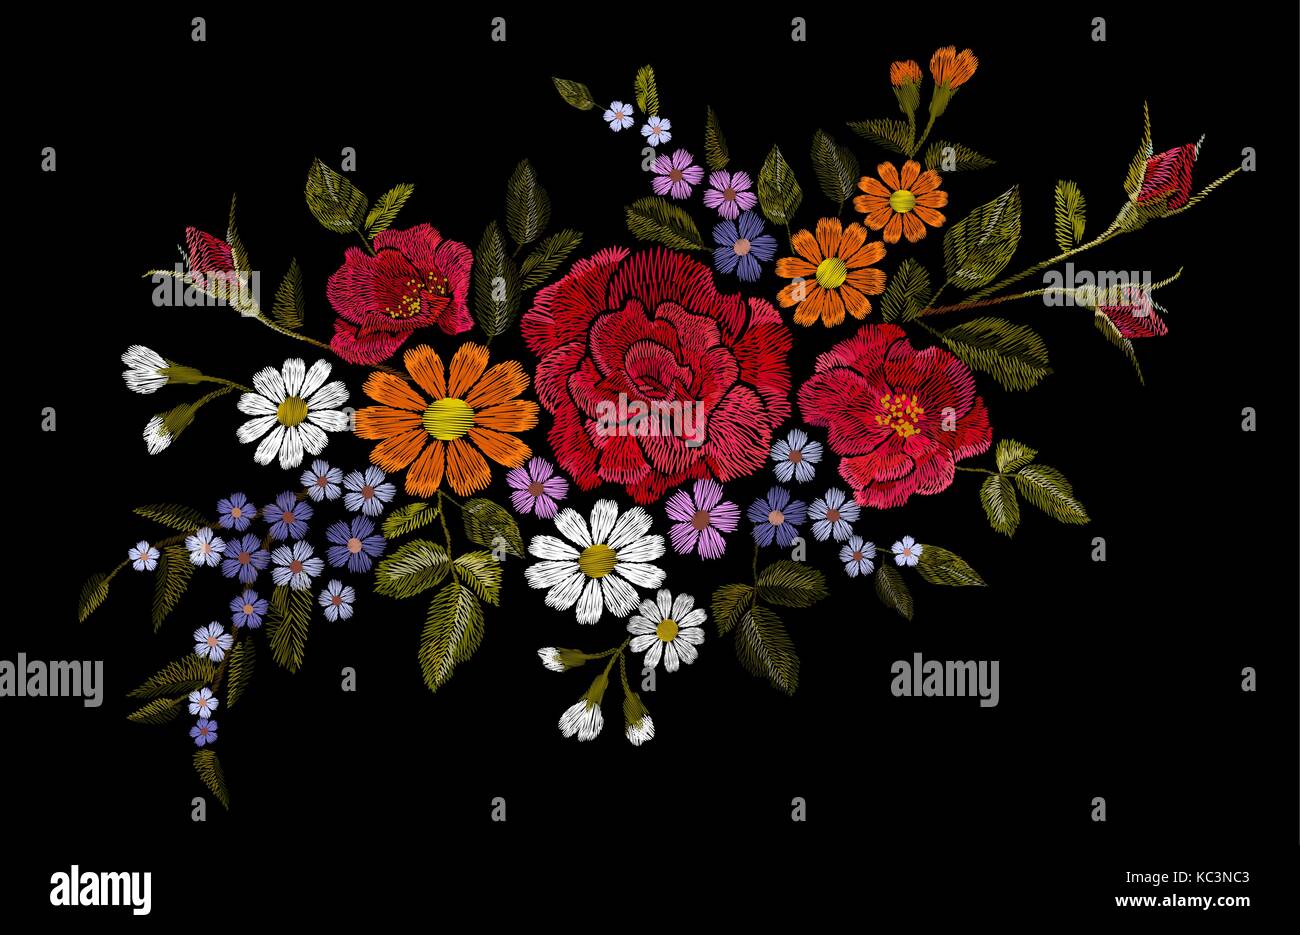 Embroidery flower rose poppy daisy gerbera herb sticker patch fashion print textile vector illustration art Stock Vector